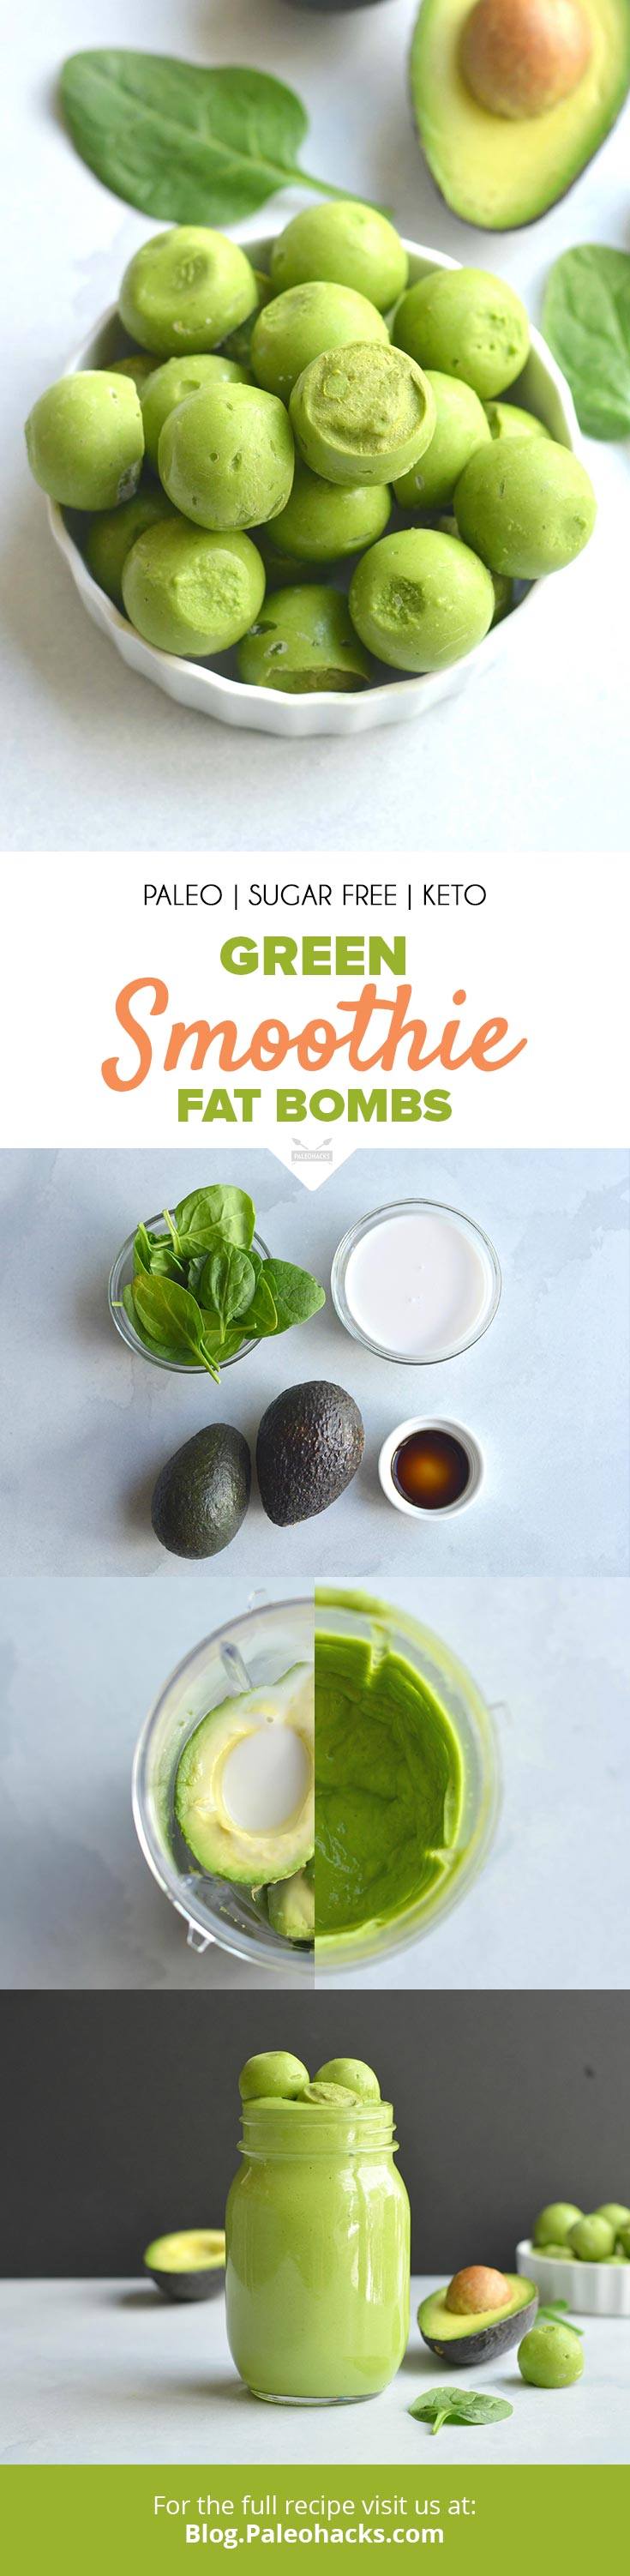 Made with just 4 wholesome ingredients – avocados, coconut milk, spinach, and vanilla, these green smoothie fat bombs are exactly what you need for a healthy snack.